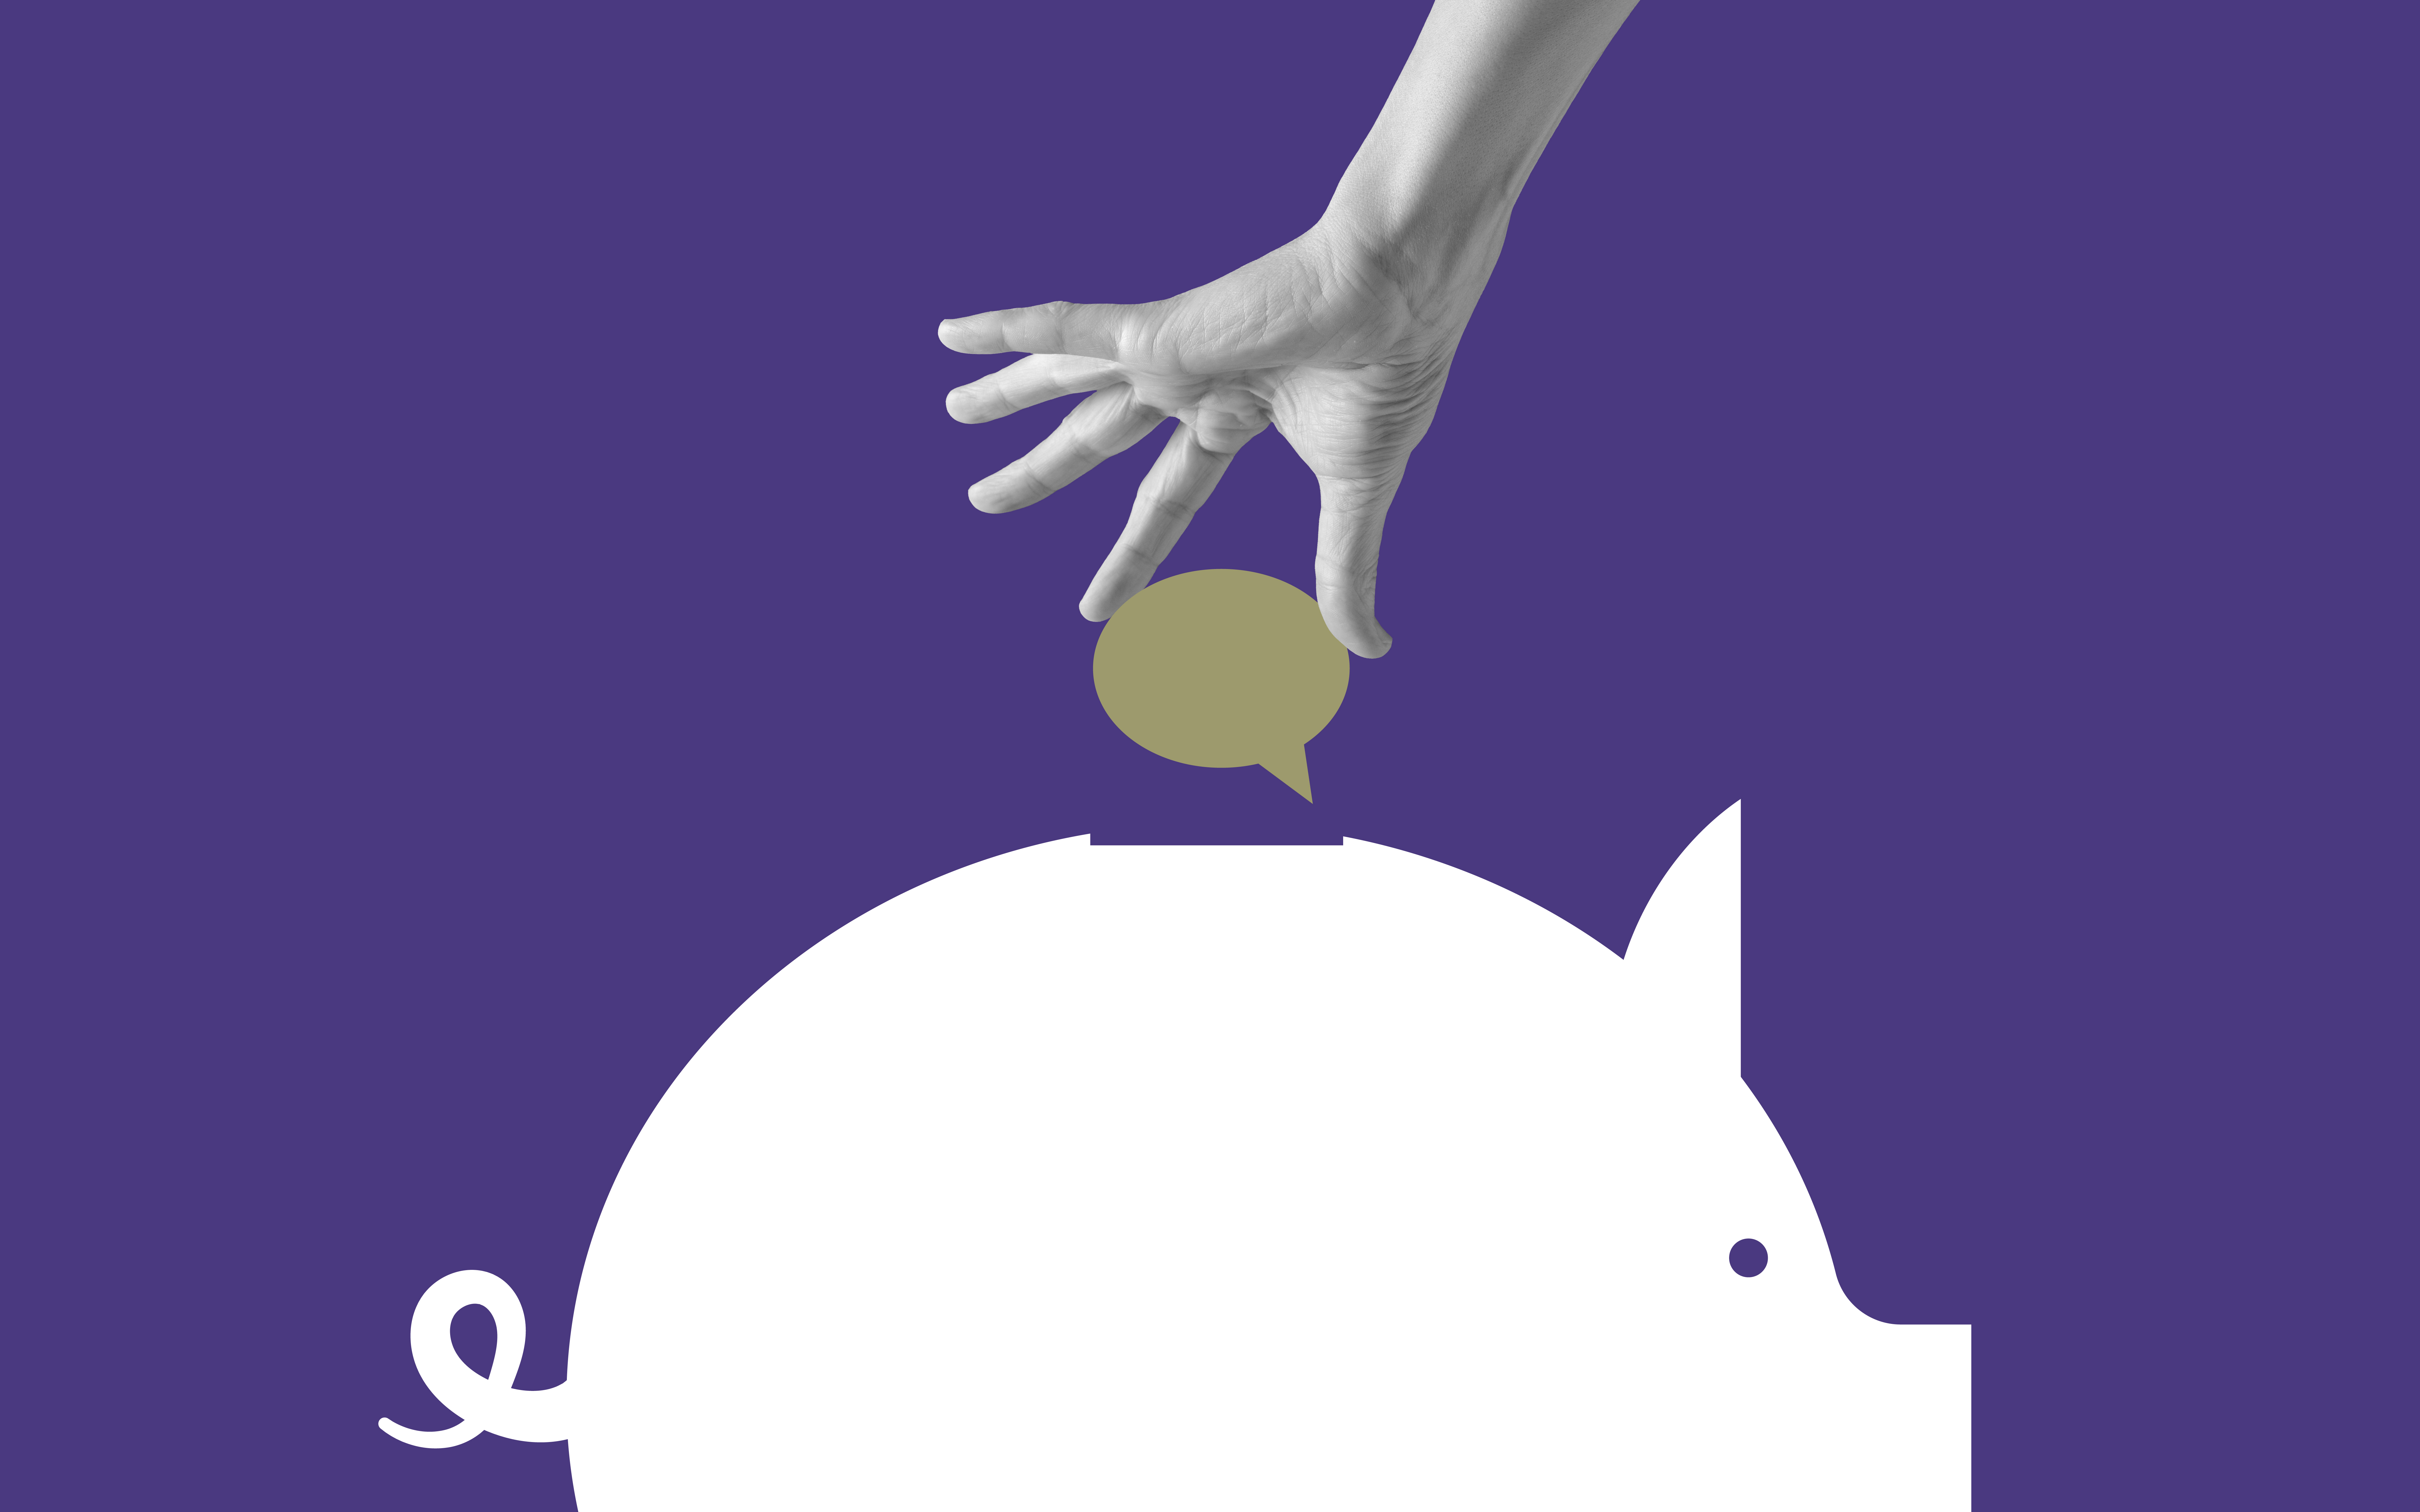 Image of a hand putting a speech bubble into a white piggy bank against a purple background.